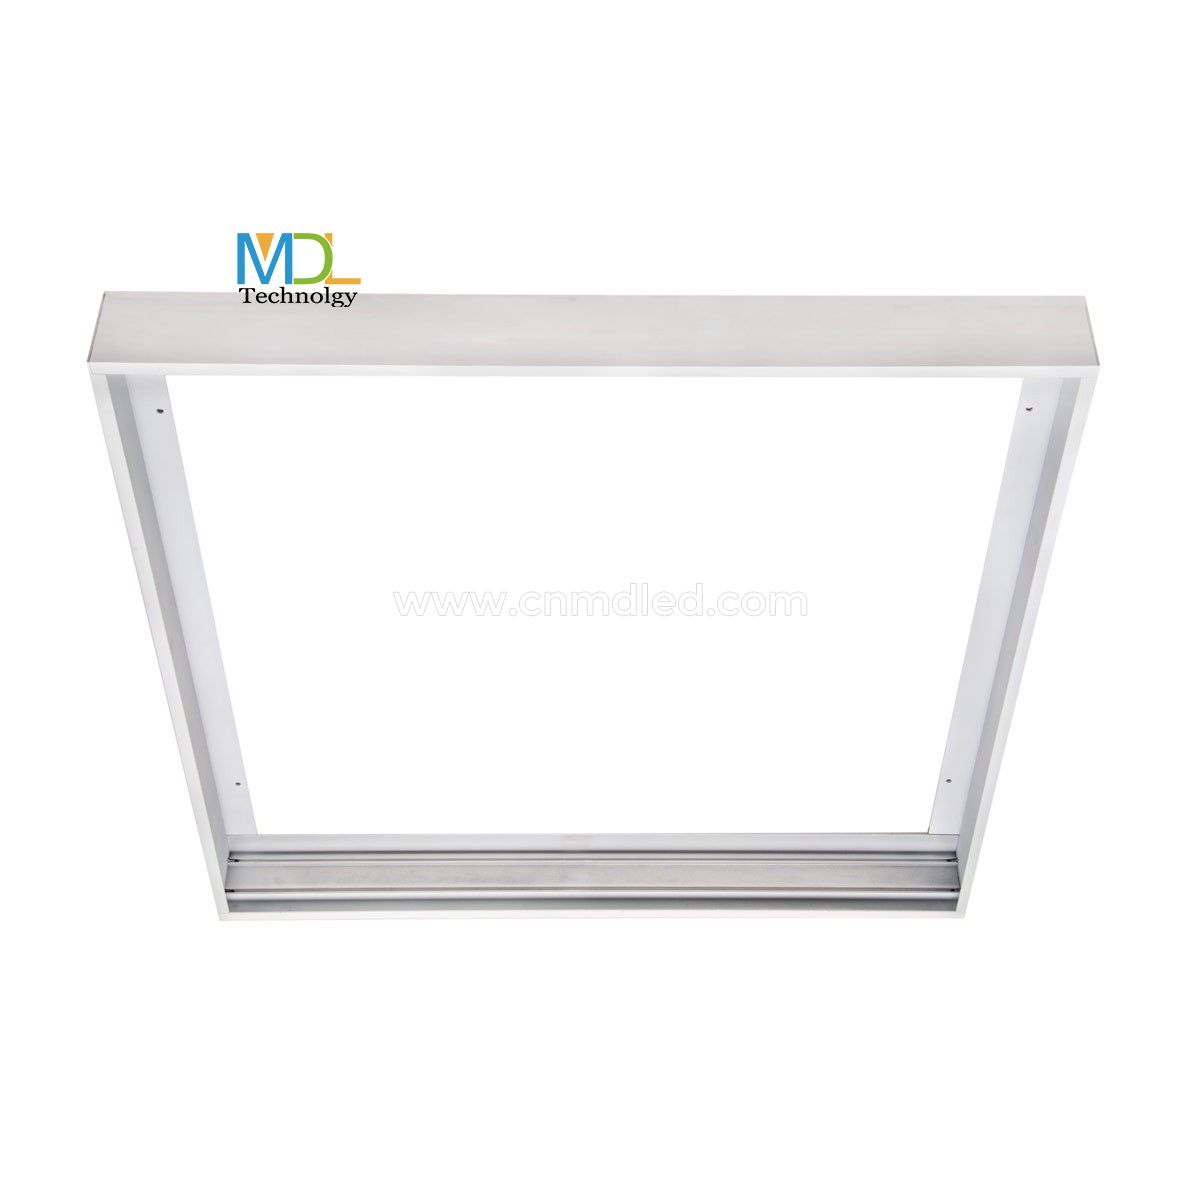 Ceiling Mounted Frame Accessories Model: MDL-PL-Accessories